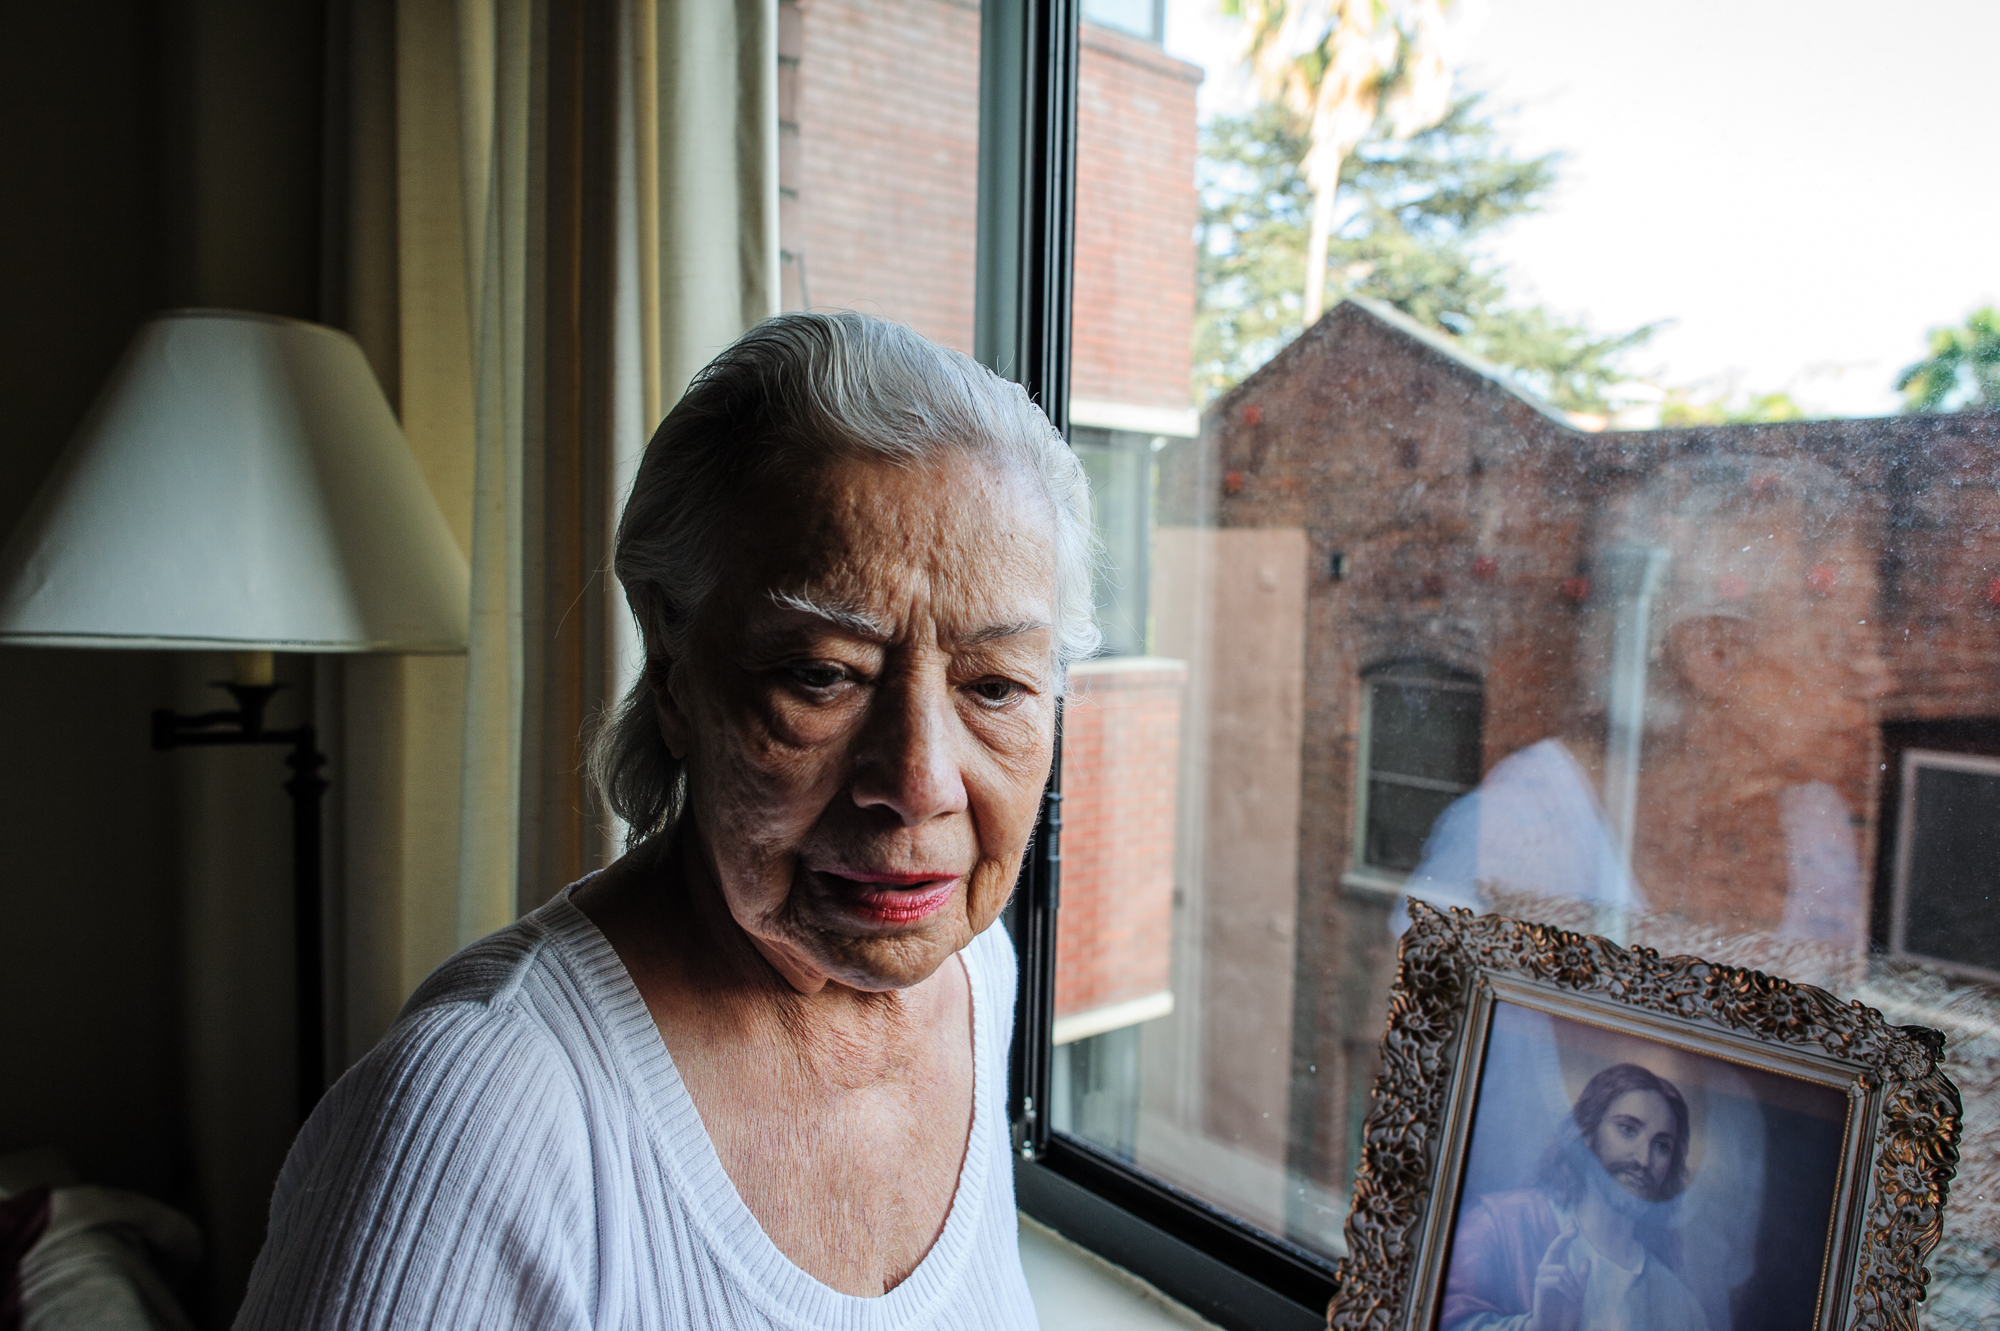  Bianca, age 85, stands by her window in the afternoon, 2010.  